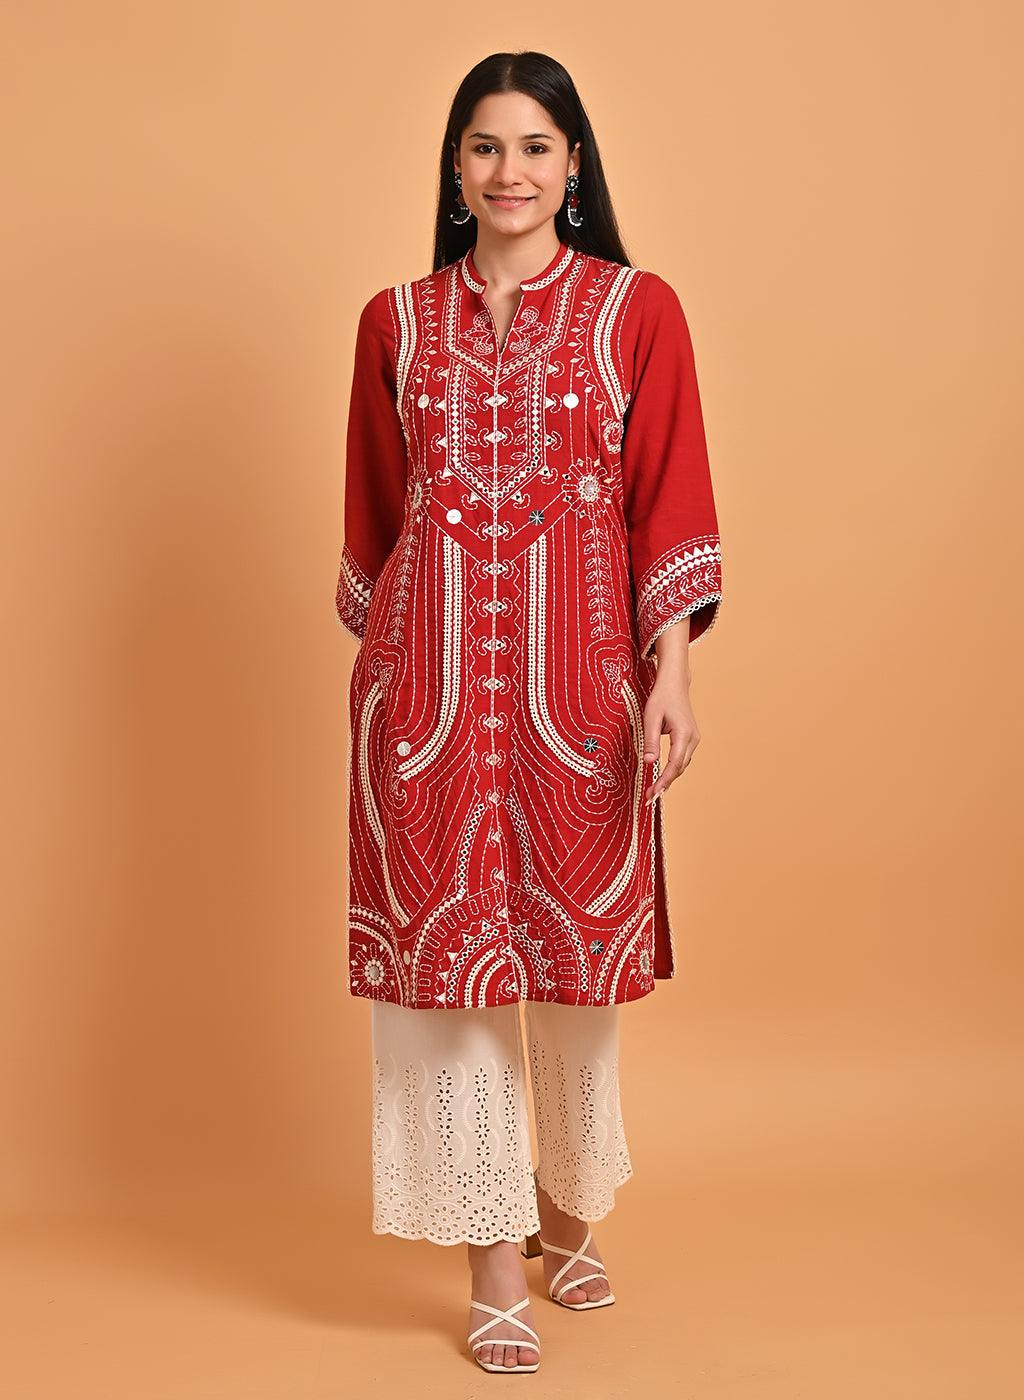 Our exquisite woolen kurtis with handcrafted details are now available  online on our website. To shop this and more online, click the… | Instagram